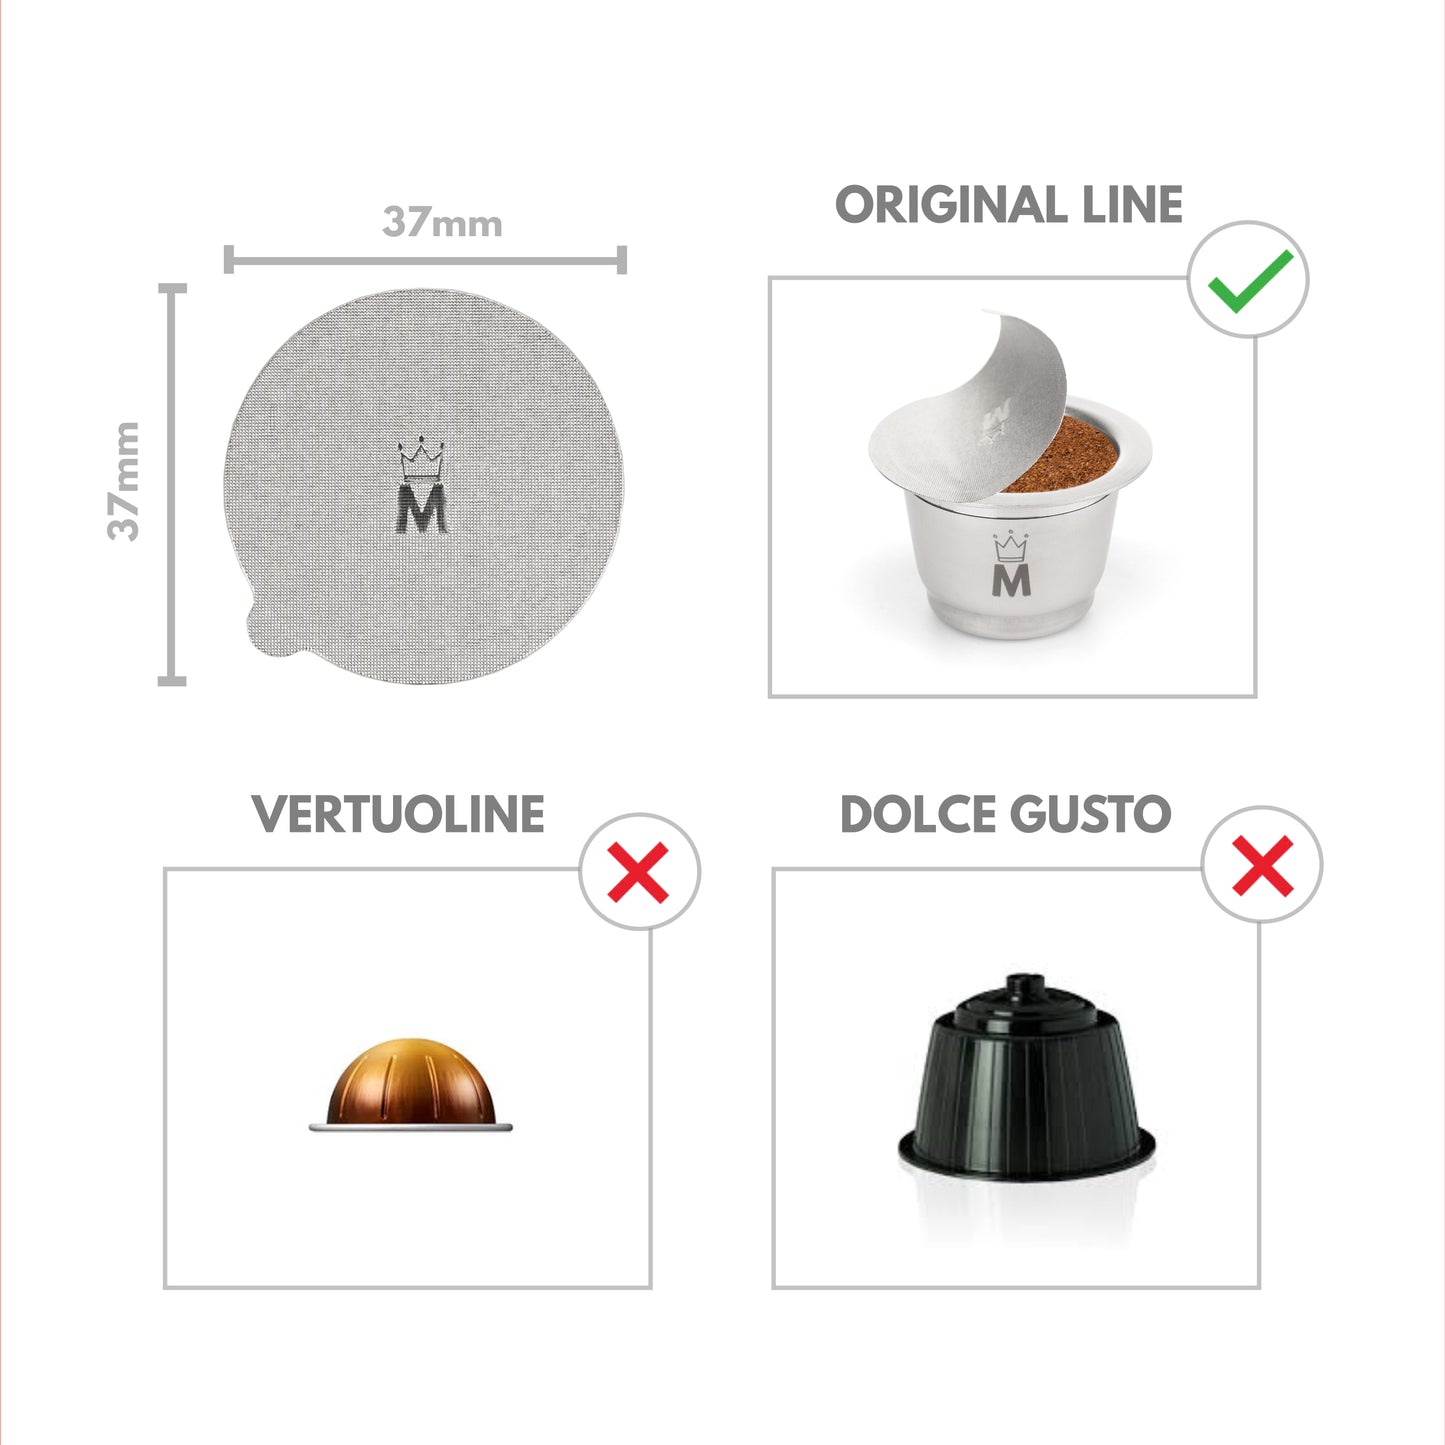 2 Refillable Coffee Pods Compatible with Nespresso - 100 Aluminum Lids